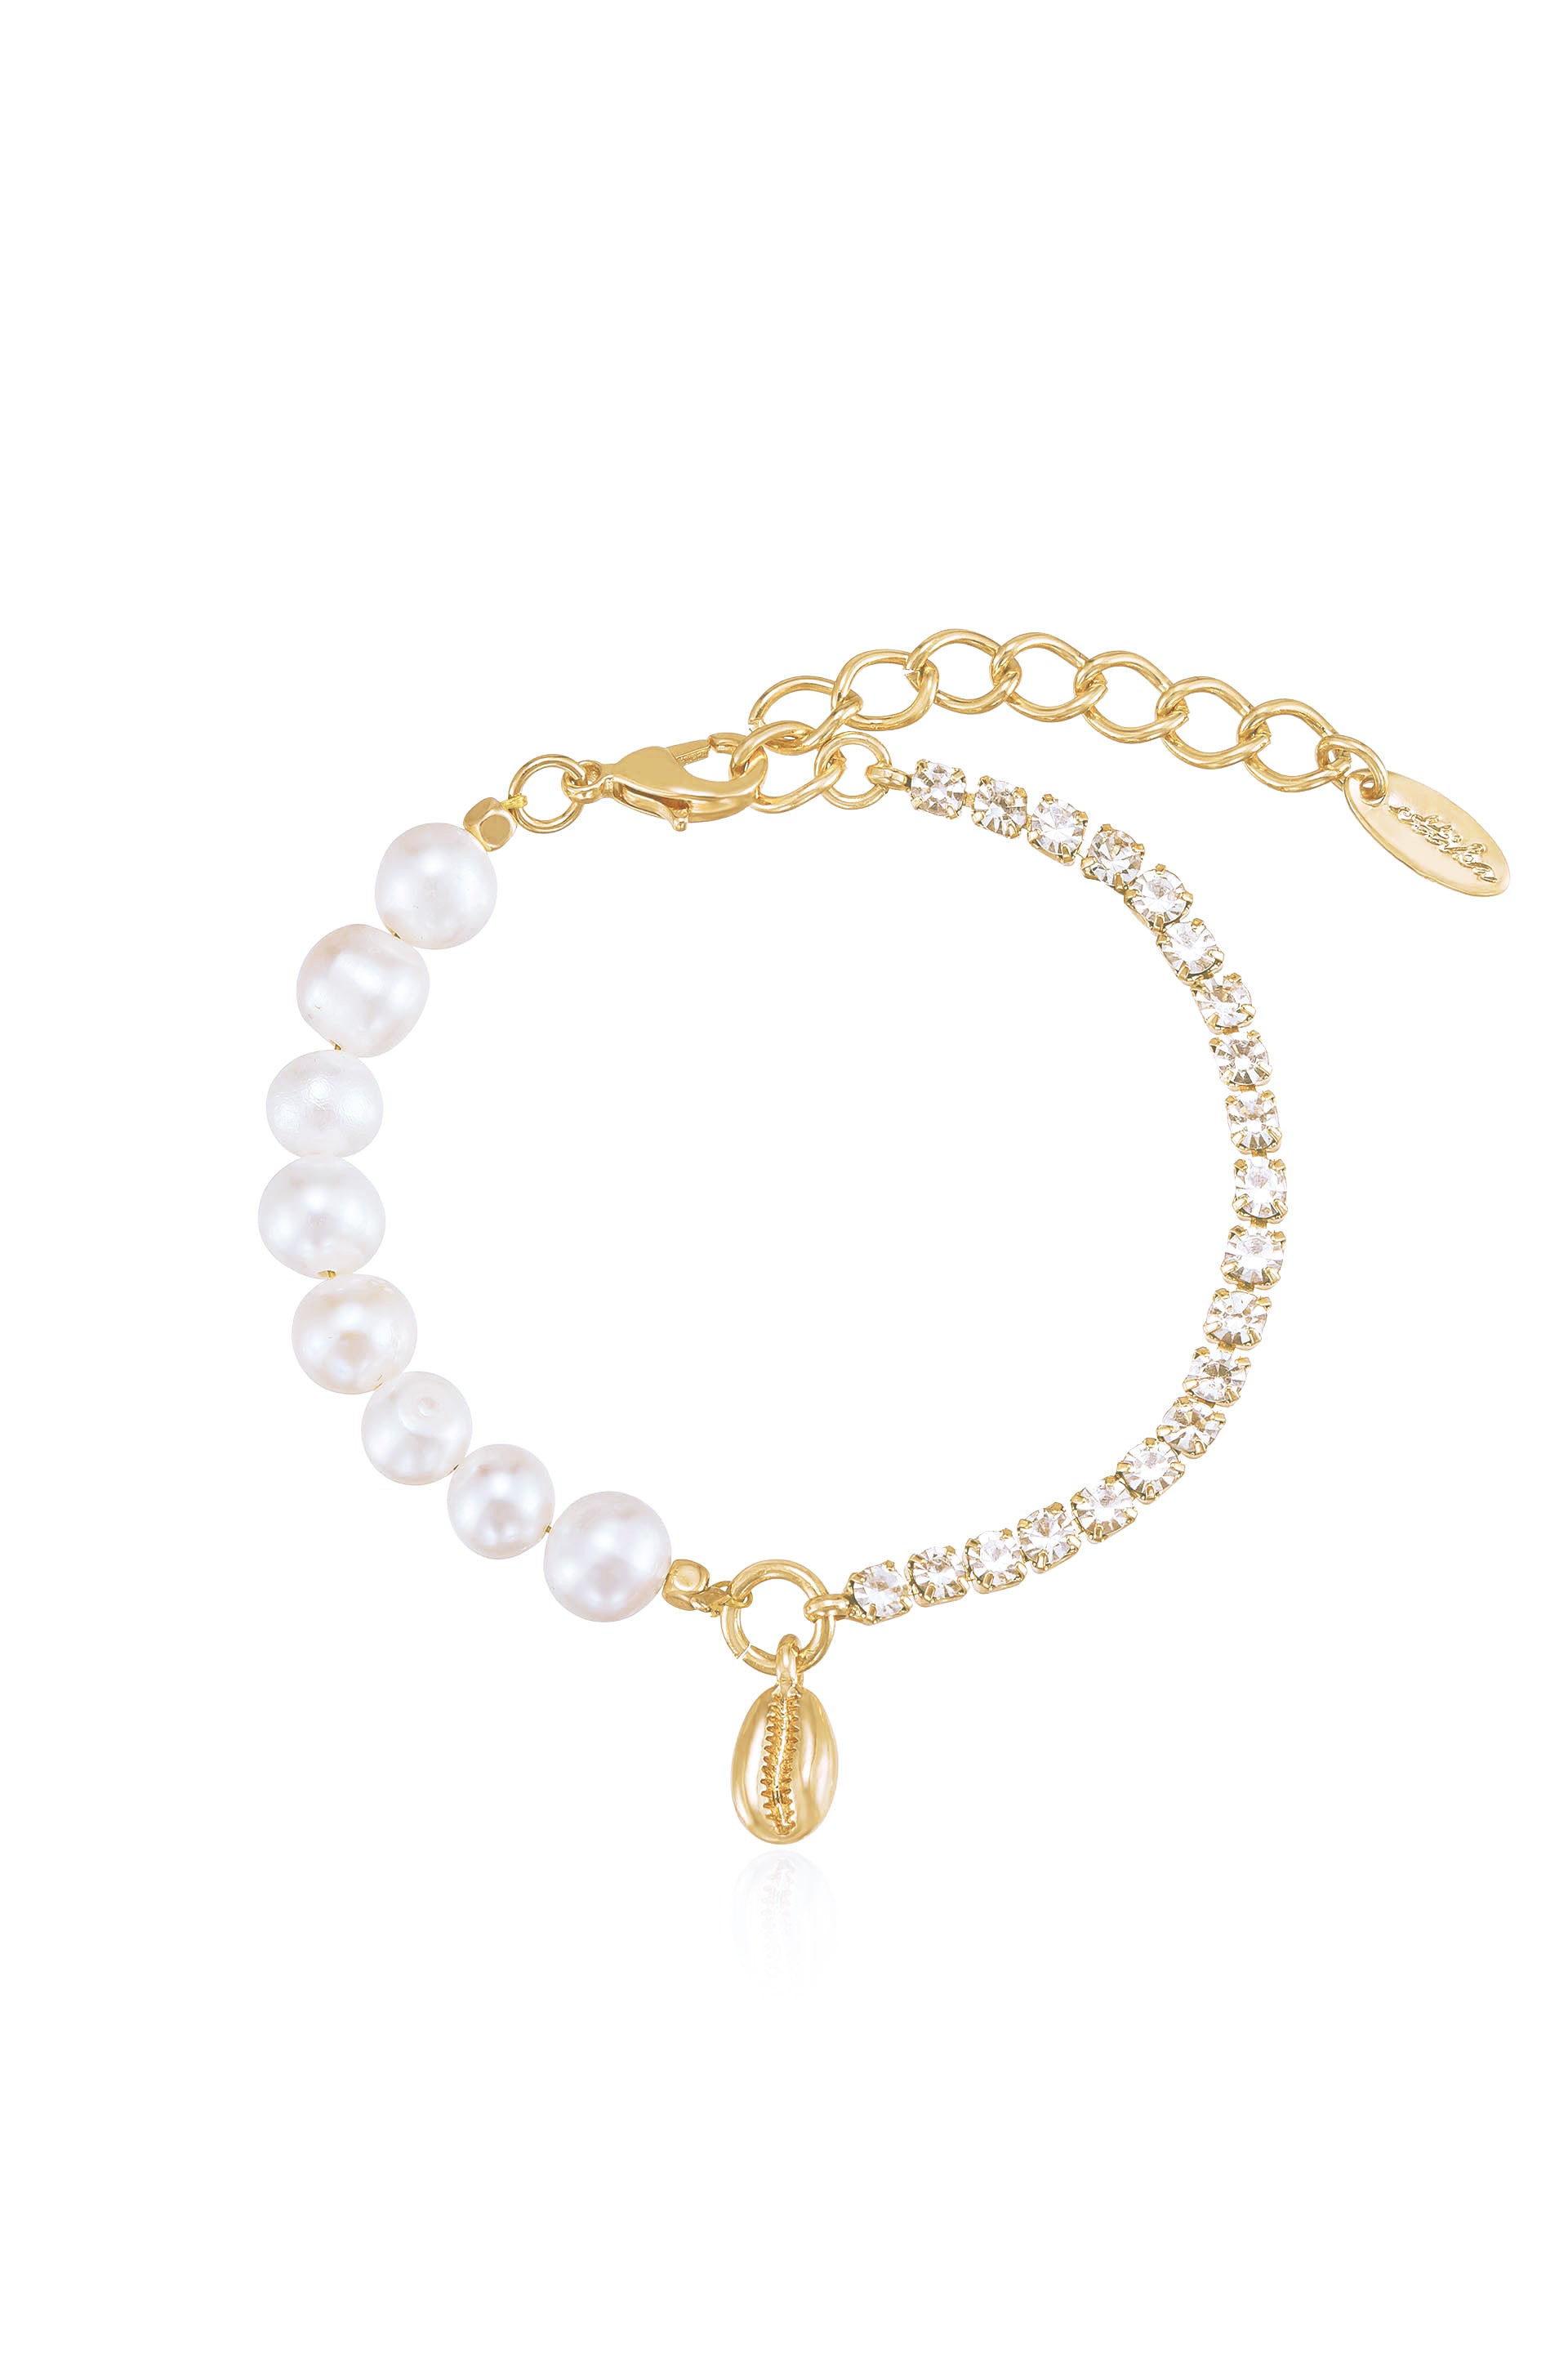 Pearl, Crystal, and Beach Shell Bracelet